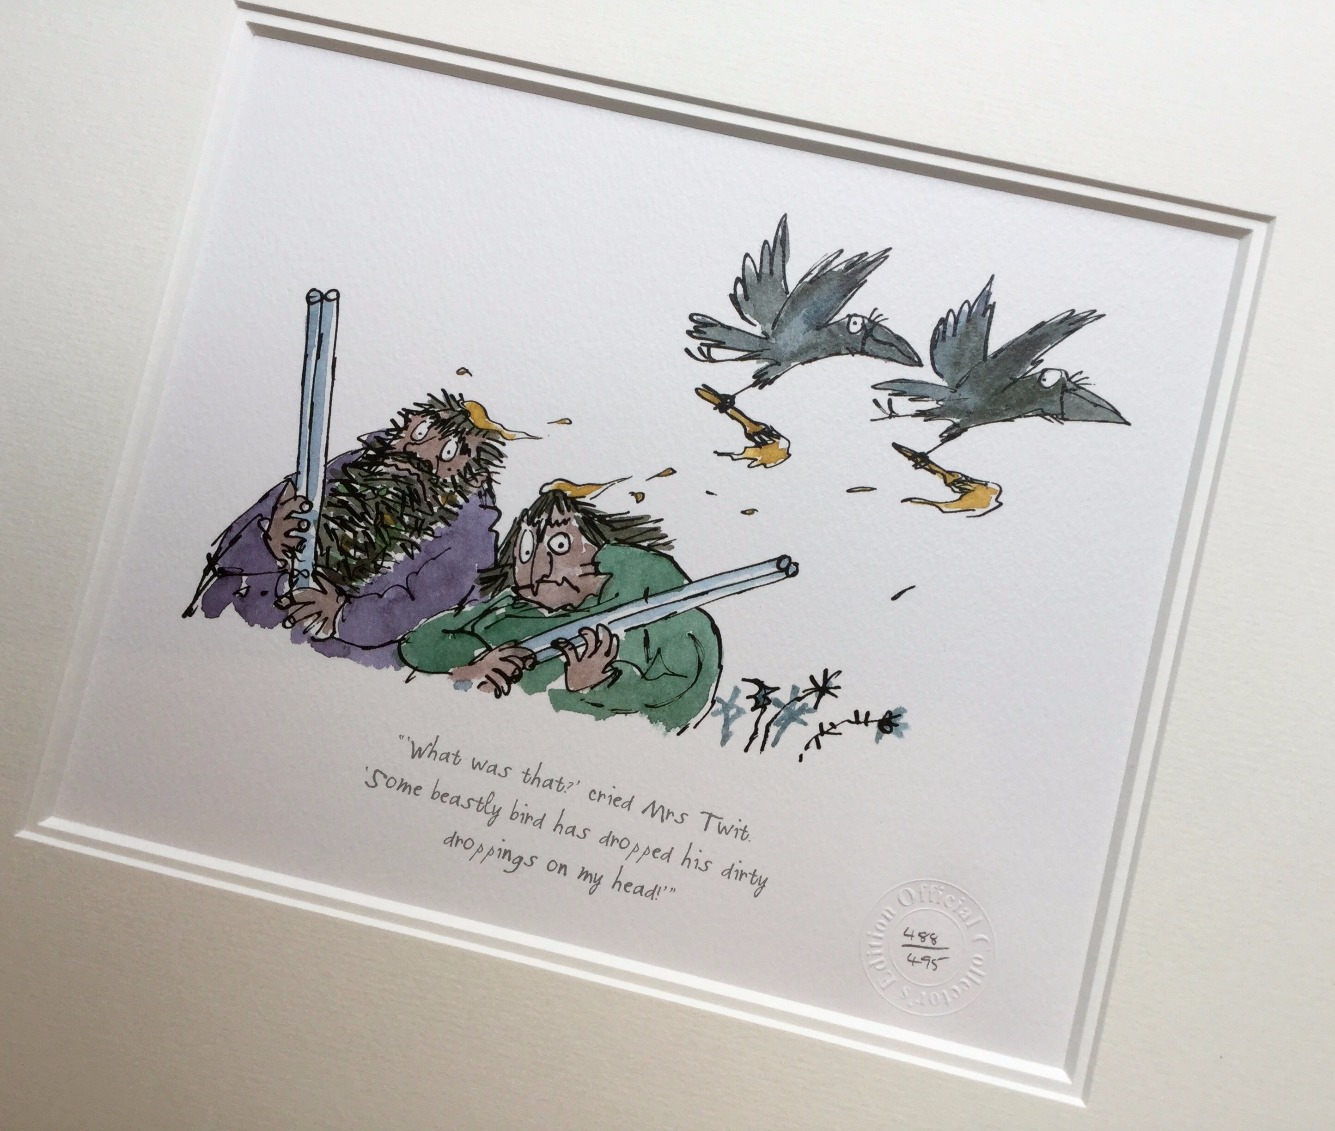 What was that? Cried Mrs Twit by Quentin Blake